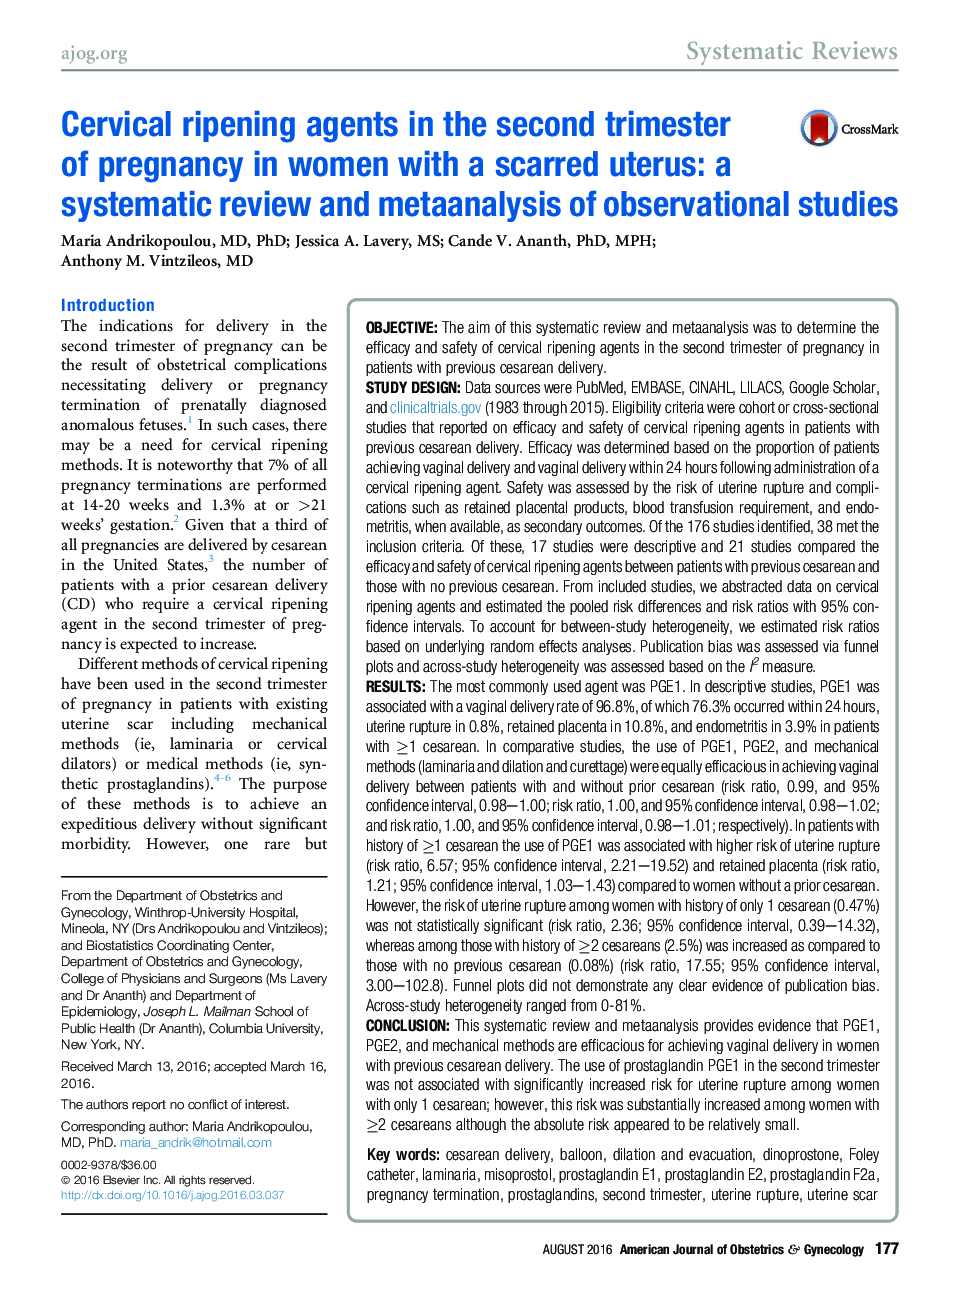 Cervical ripening agents in the second trimester of pregnancy in women with a scarred uterus: a systematic review and metaanalysis of observational studies